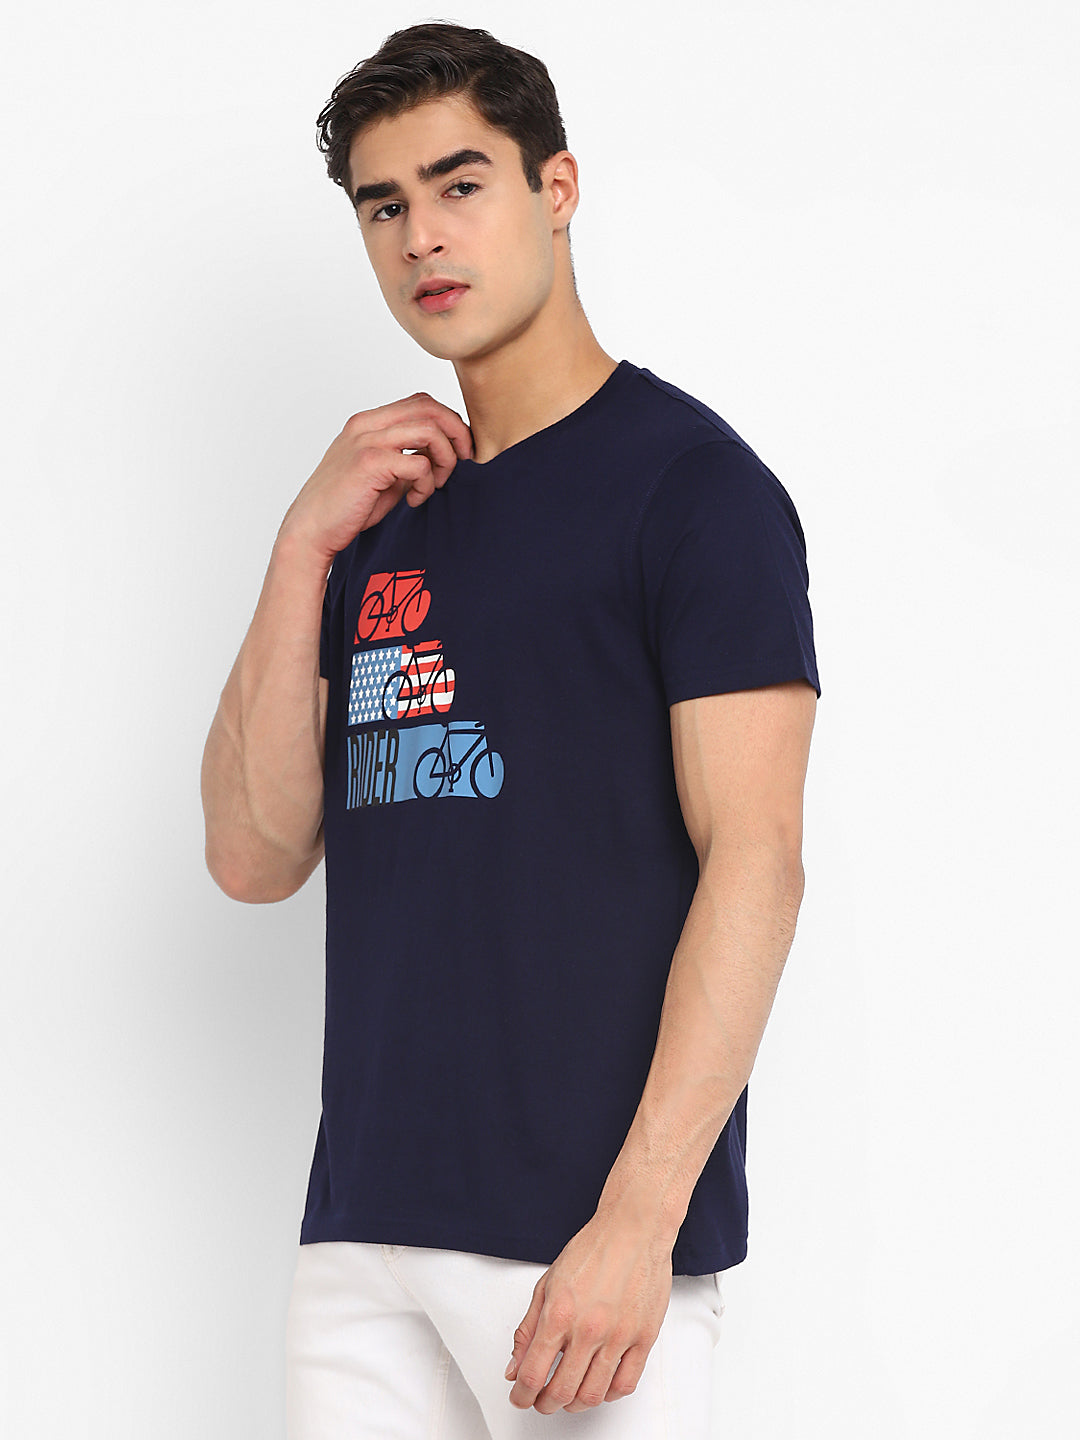 100% Cotton Printed Round Neck T-Shirt For Men - Navy